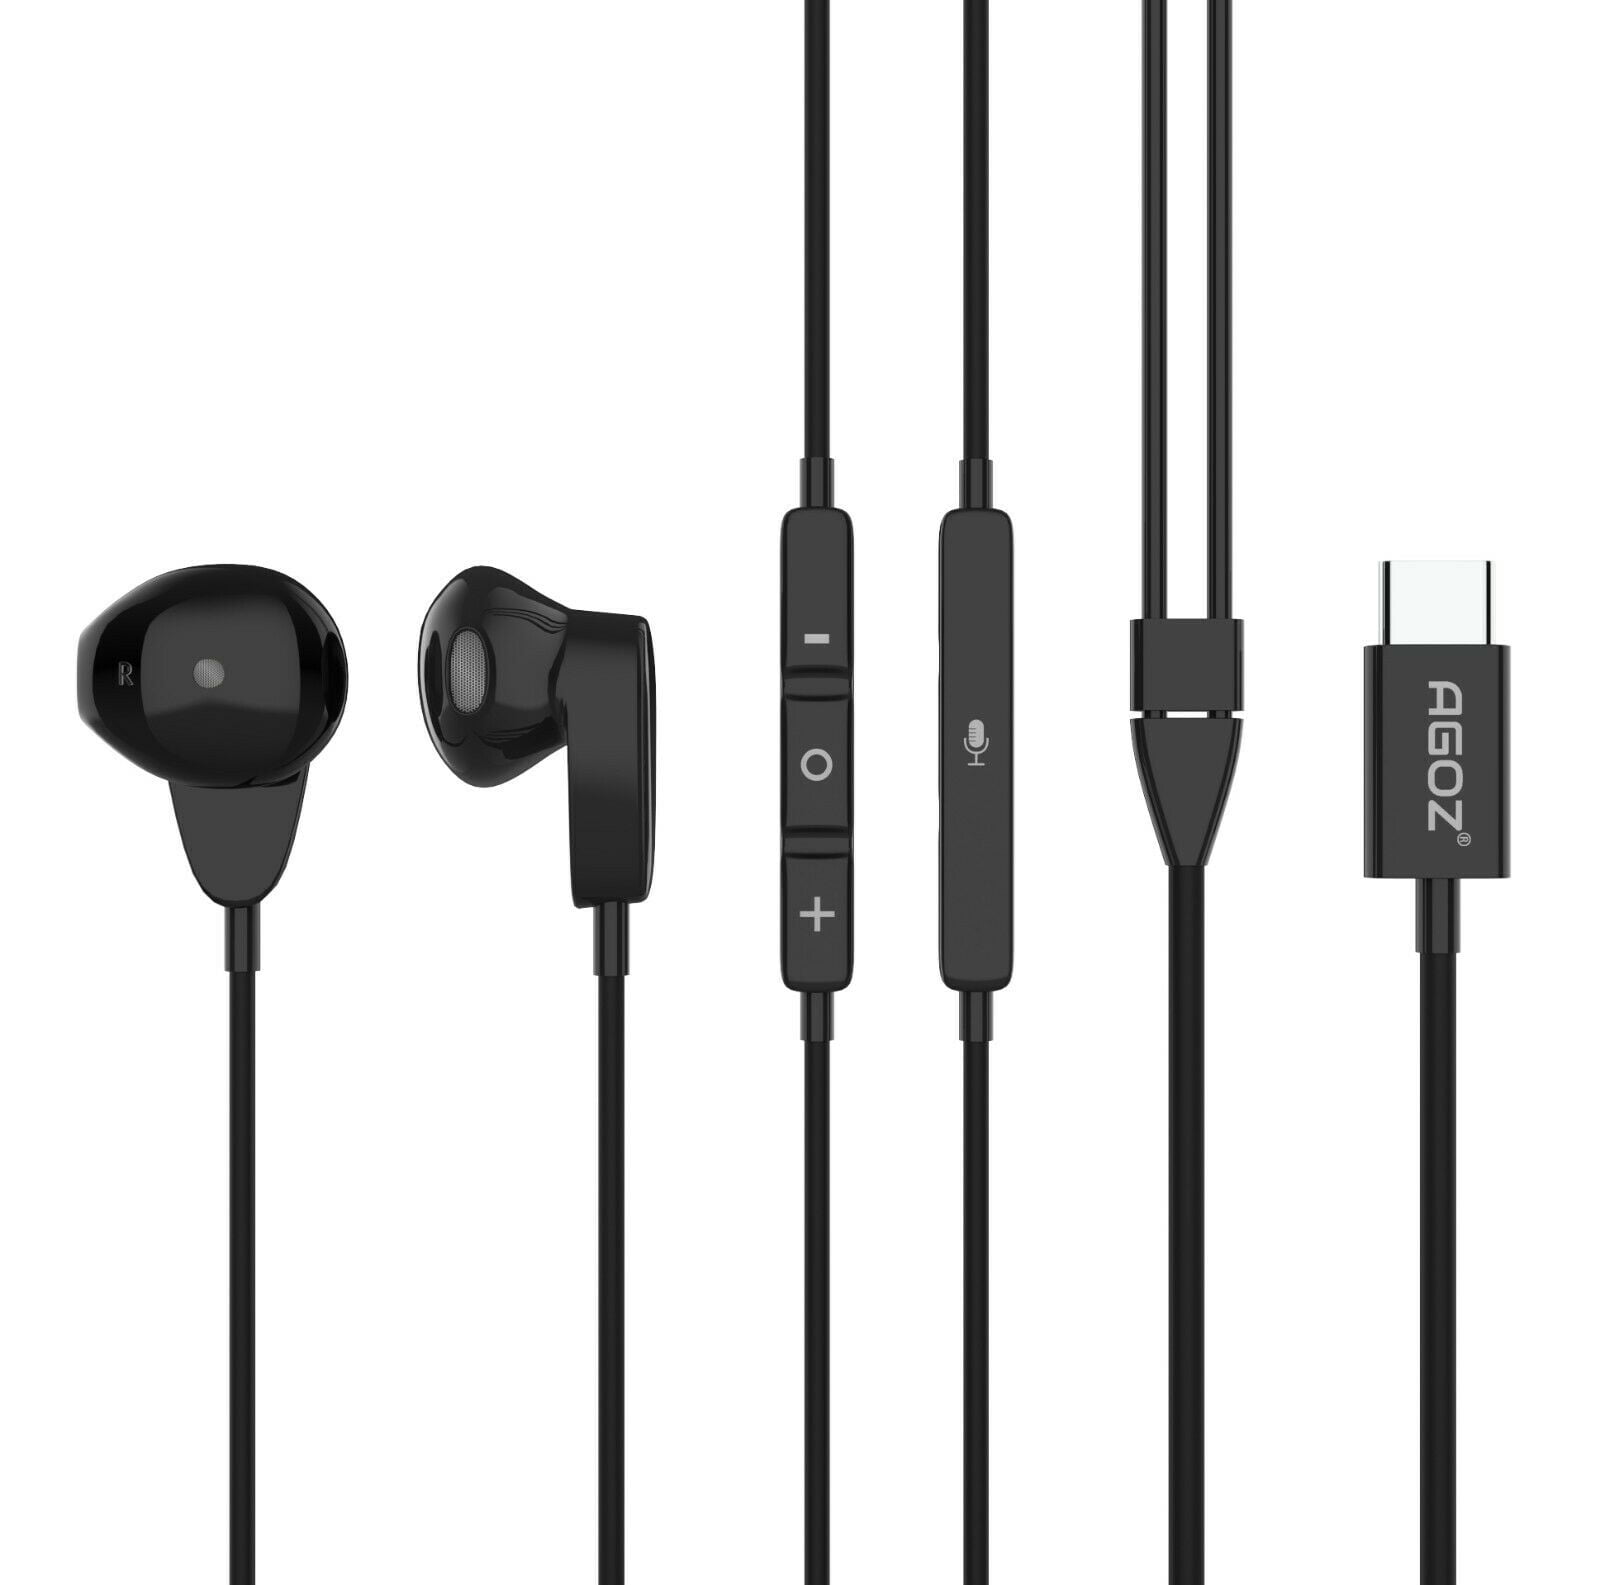 S21 S20 FE A53 Note 20 Ultra Pixel 6 6a 5 4 3 2 XL OnePlus 8 Pro APETOO USB C Headphones for Note 10 Plus,HiFi Stereo Magnetic USBC Wired Earbuds with Mic Type C Headphones for Samsung S22 Ultra S22 